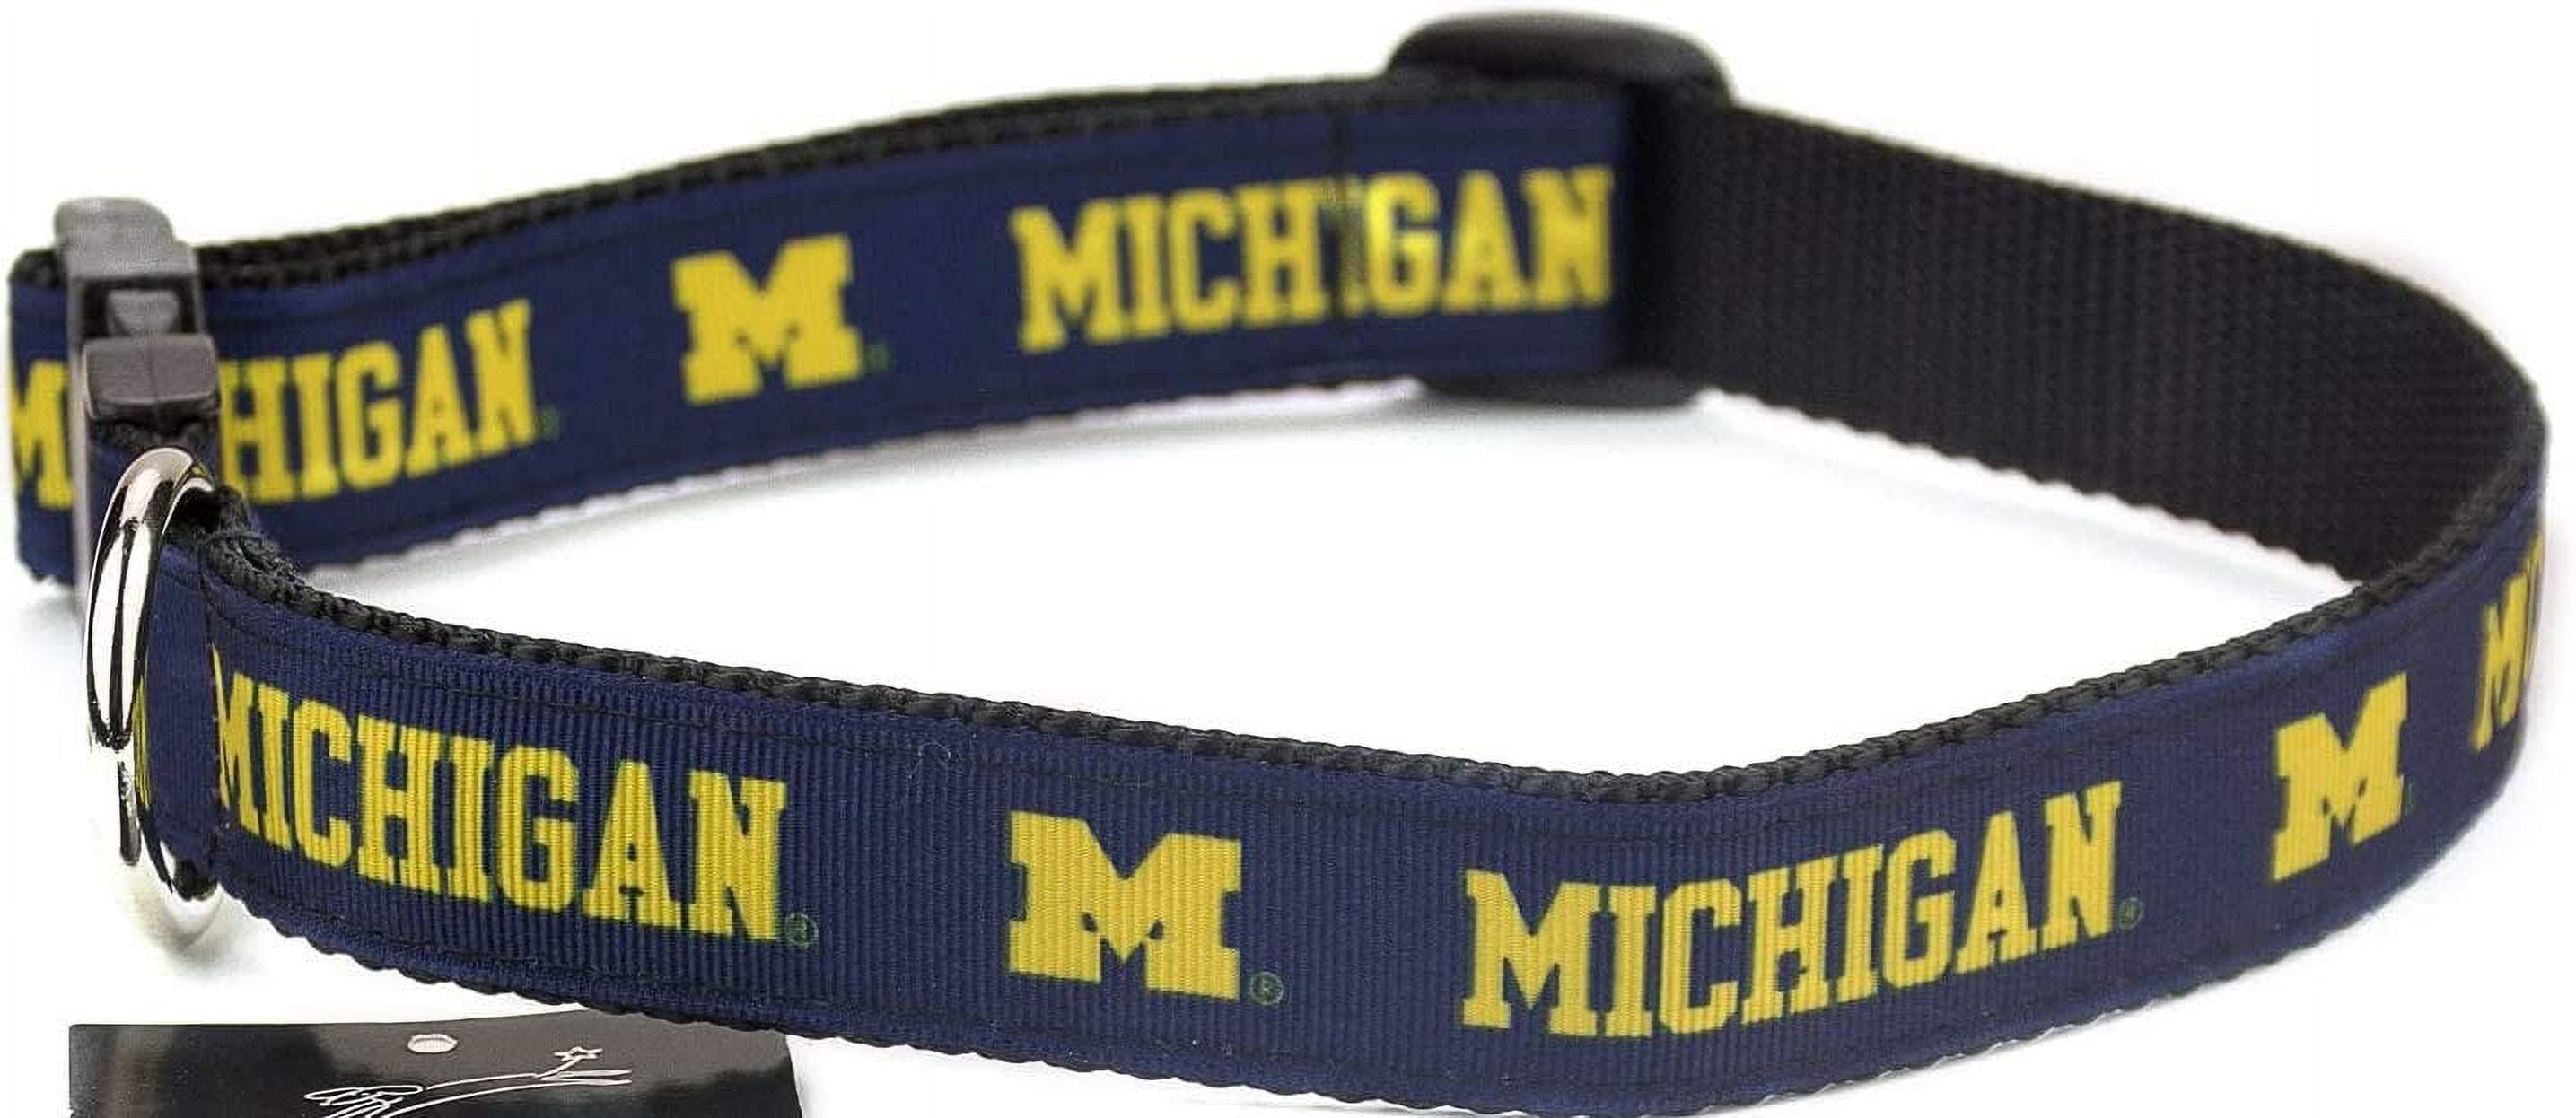 Brand New Michigan X-Small Pet Dog Collar(3/4 Inch Wide, 6-12 Inch Long), and Small Leash(5/8 Inch Wide, 6 Feet Long) Bundle, Official Wolverines Logo/Colors - image 1 of 2